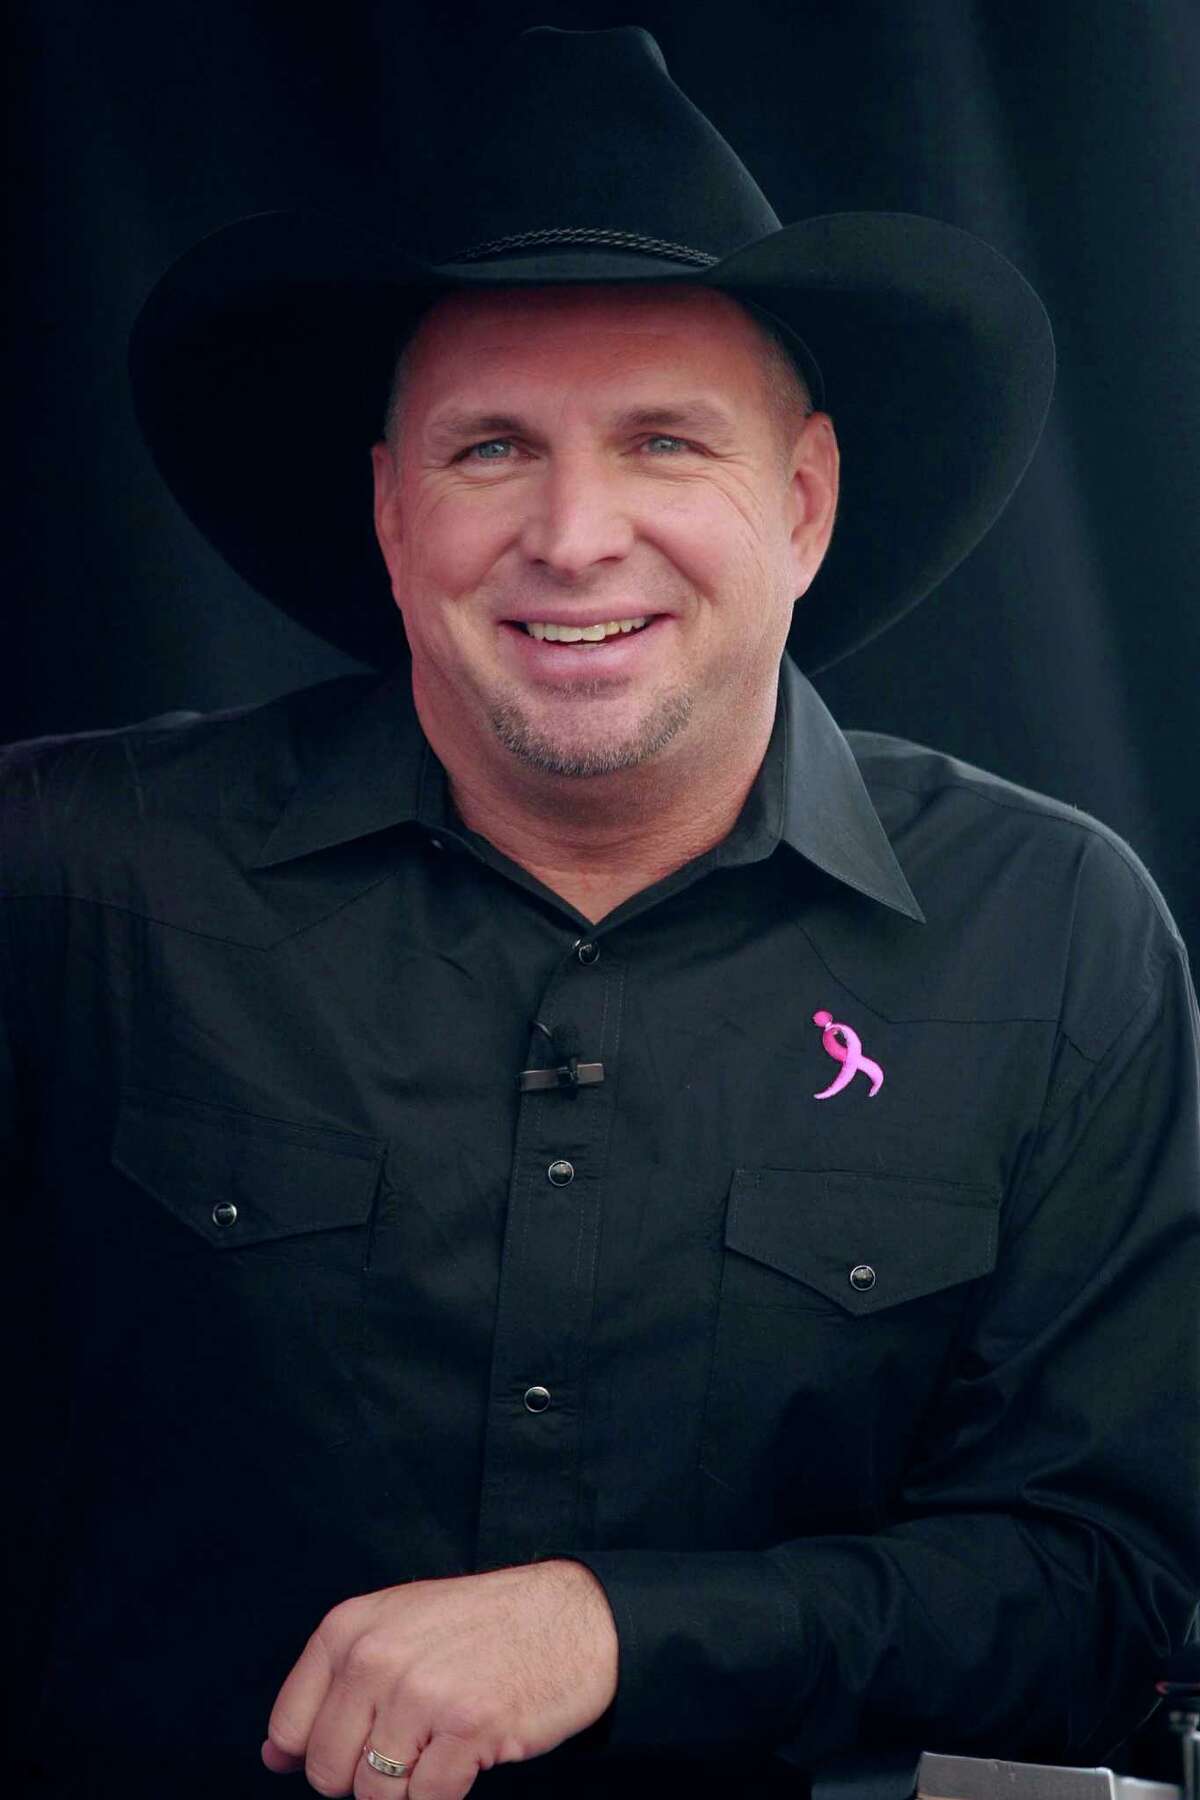 Country singer Garth Brooks holds a press conference to announce that two-thirds of the proceeds from his next CD "Garth Brooks The Ulitmate Hits" will benefit the Susan G. Komen for the Cure Foundation to fight breast cancer, Monday, Oct. 15, 2007 at South Street Seaport in New York. (AP Photo/Evan Agostini)